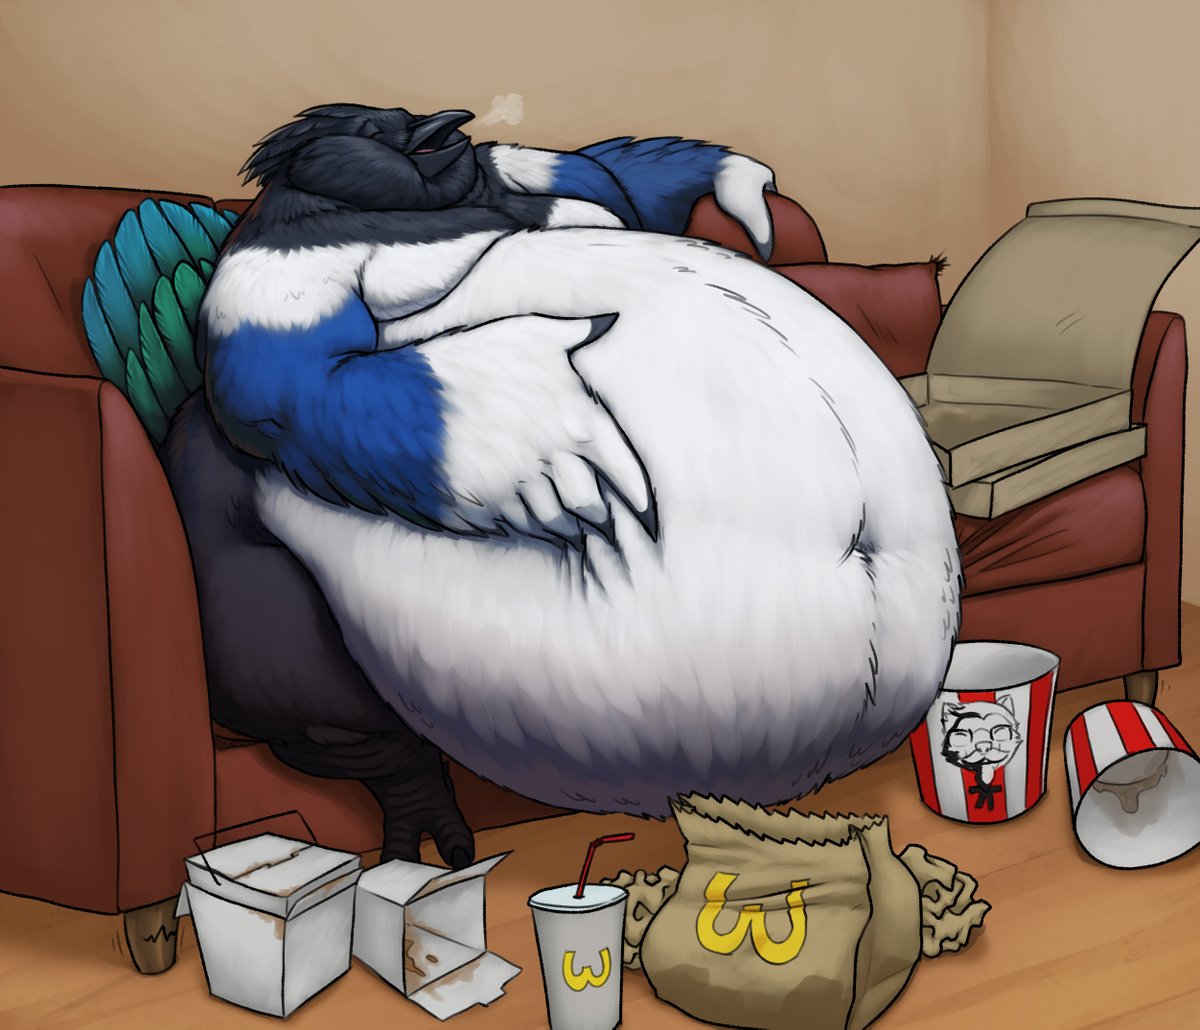 (had to repost, sorry!) Commission for anonymous! Just a little pre-dinner snacking.